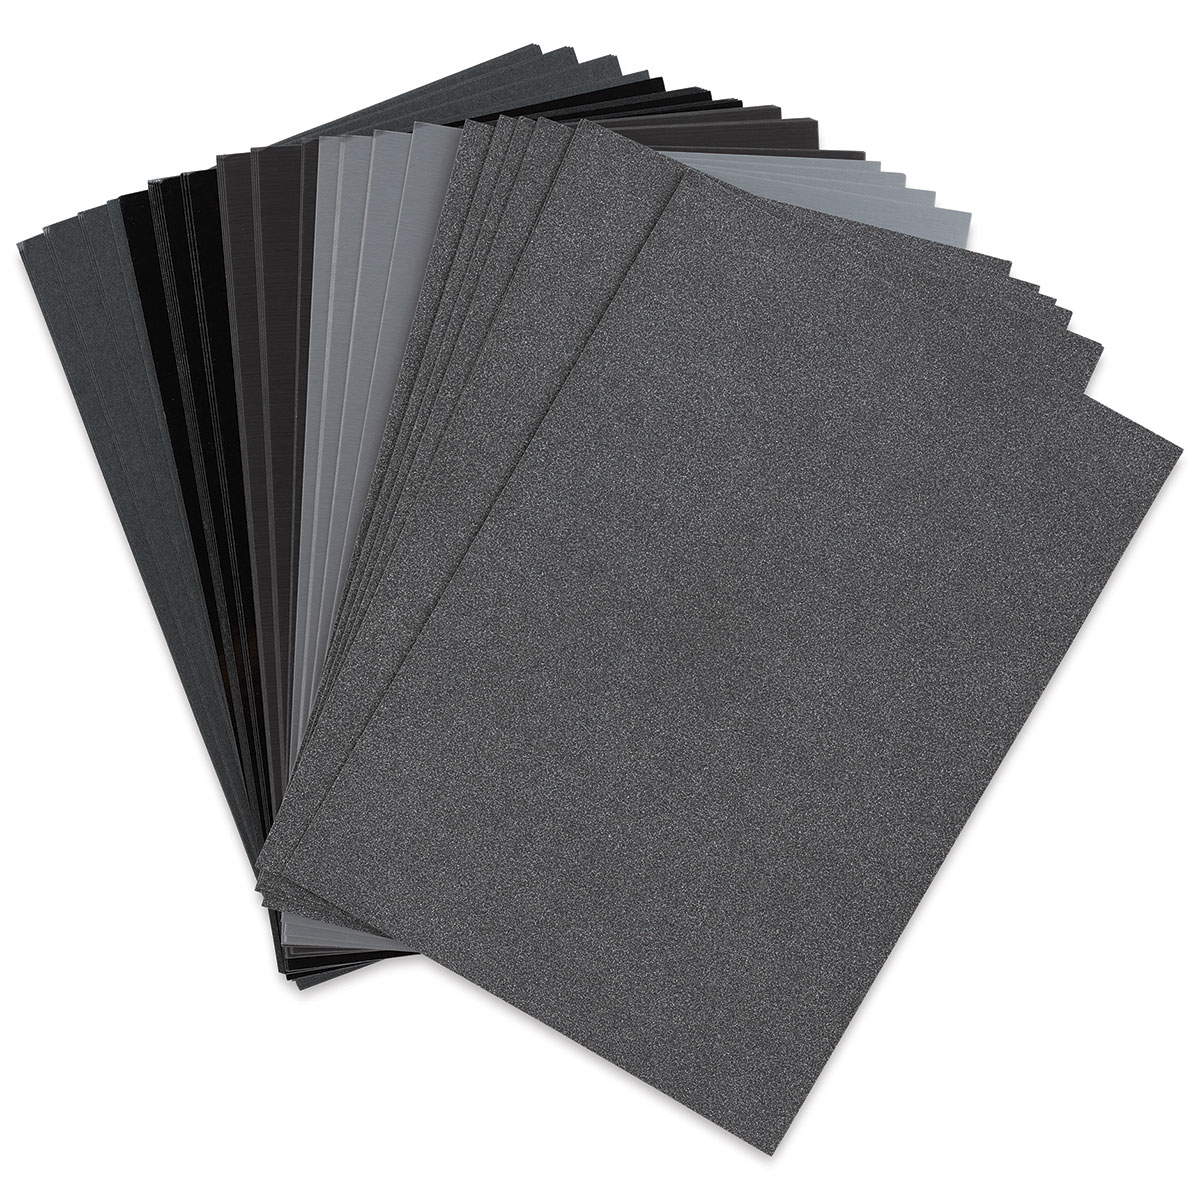 8.5 x 11 Gray Color Paper Smooth, for School, Office & Home Supplies,  Holiday Crafting, Arts & Crafts, Acid & Lignin Free